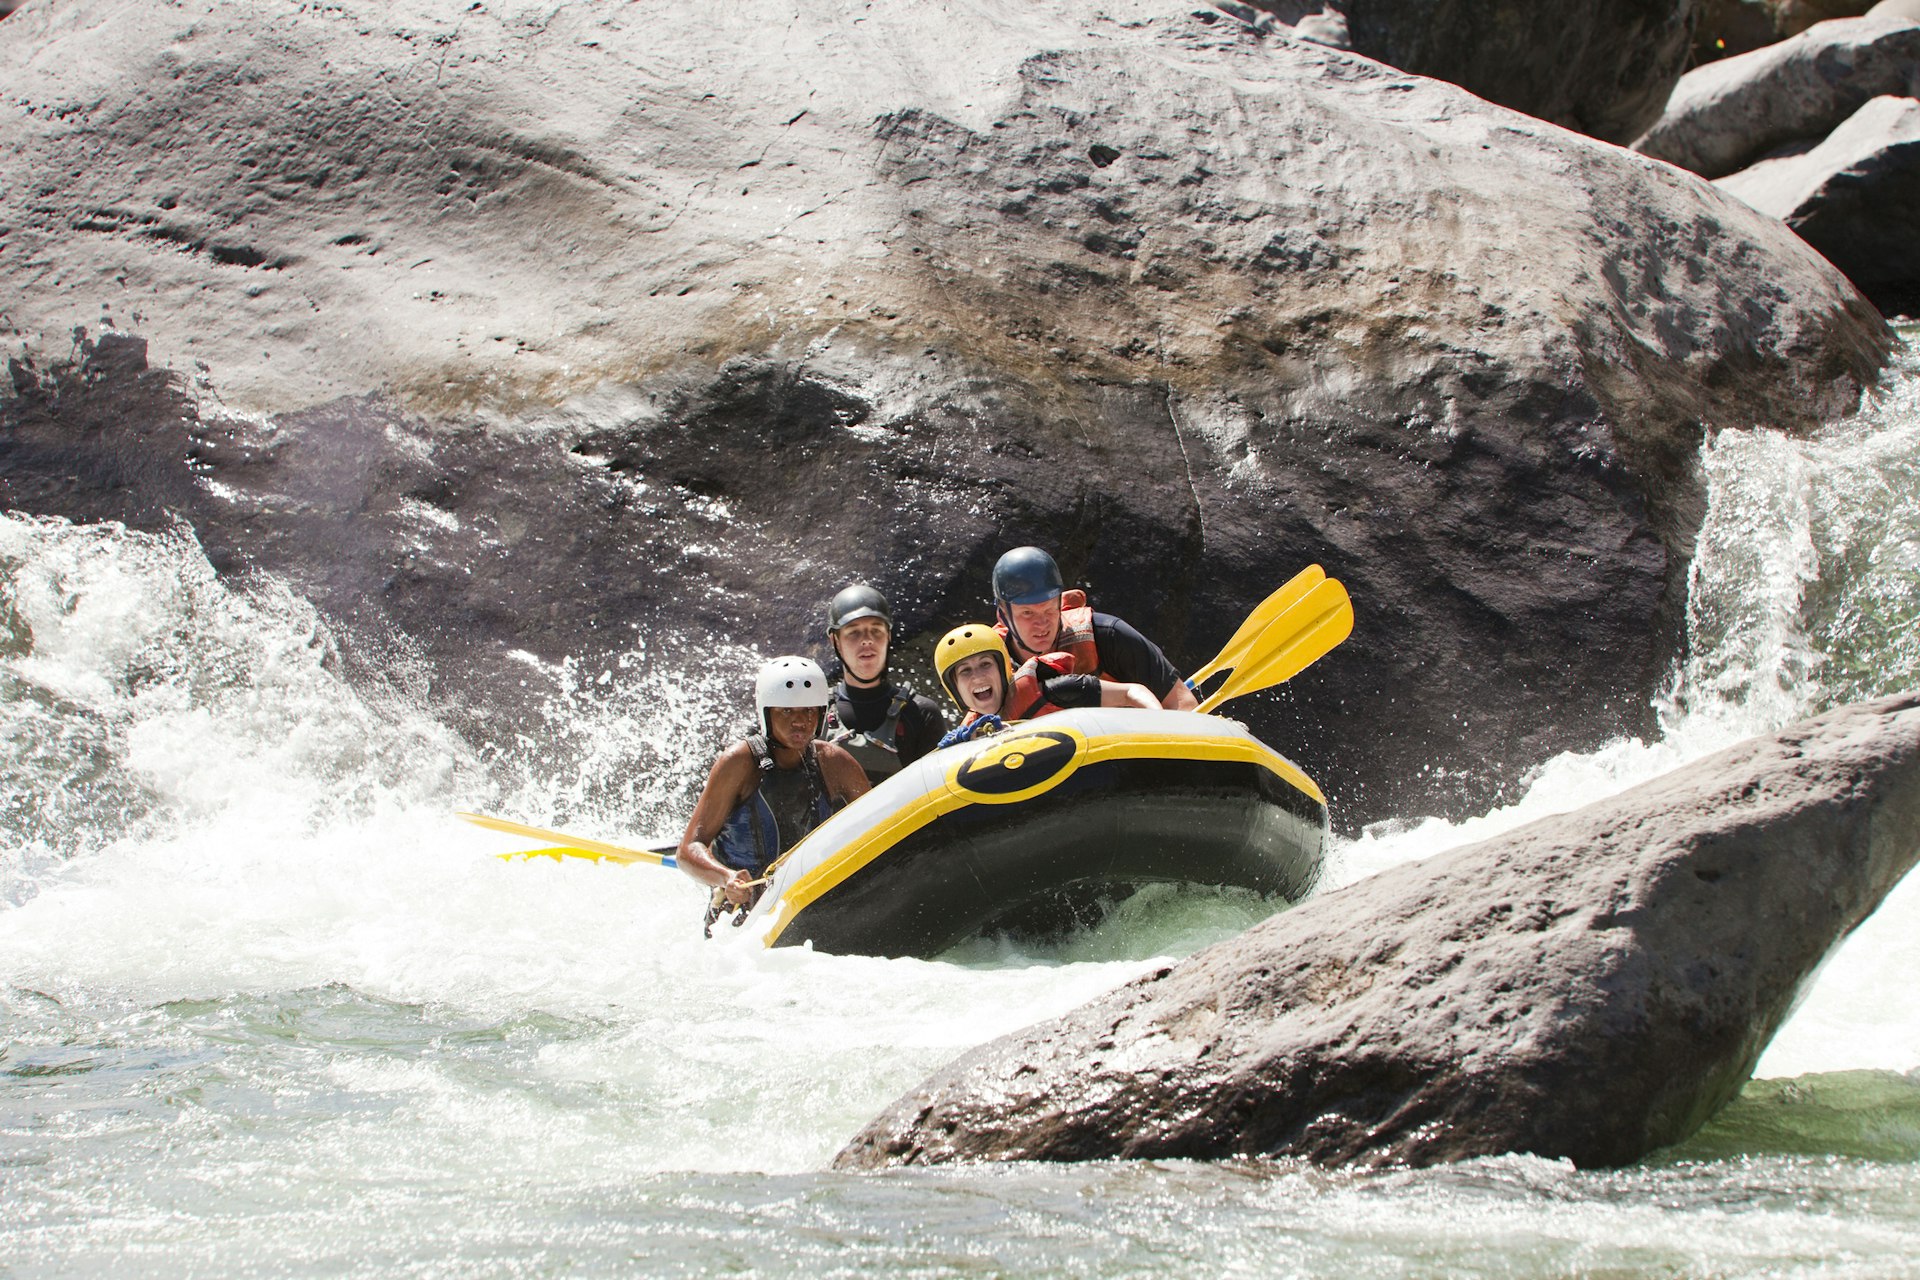 A group of four people, all wearing helmets, sit aboard a white-water raft as they hurtle down the Río Cangrejal in Honduras with huge boulders in the background